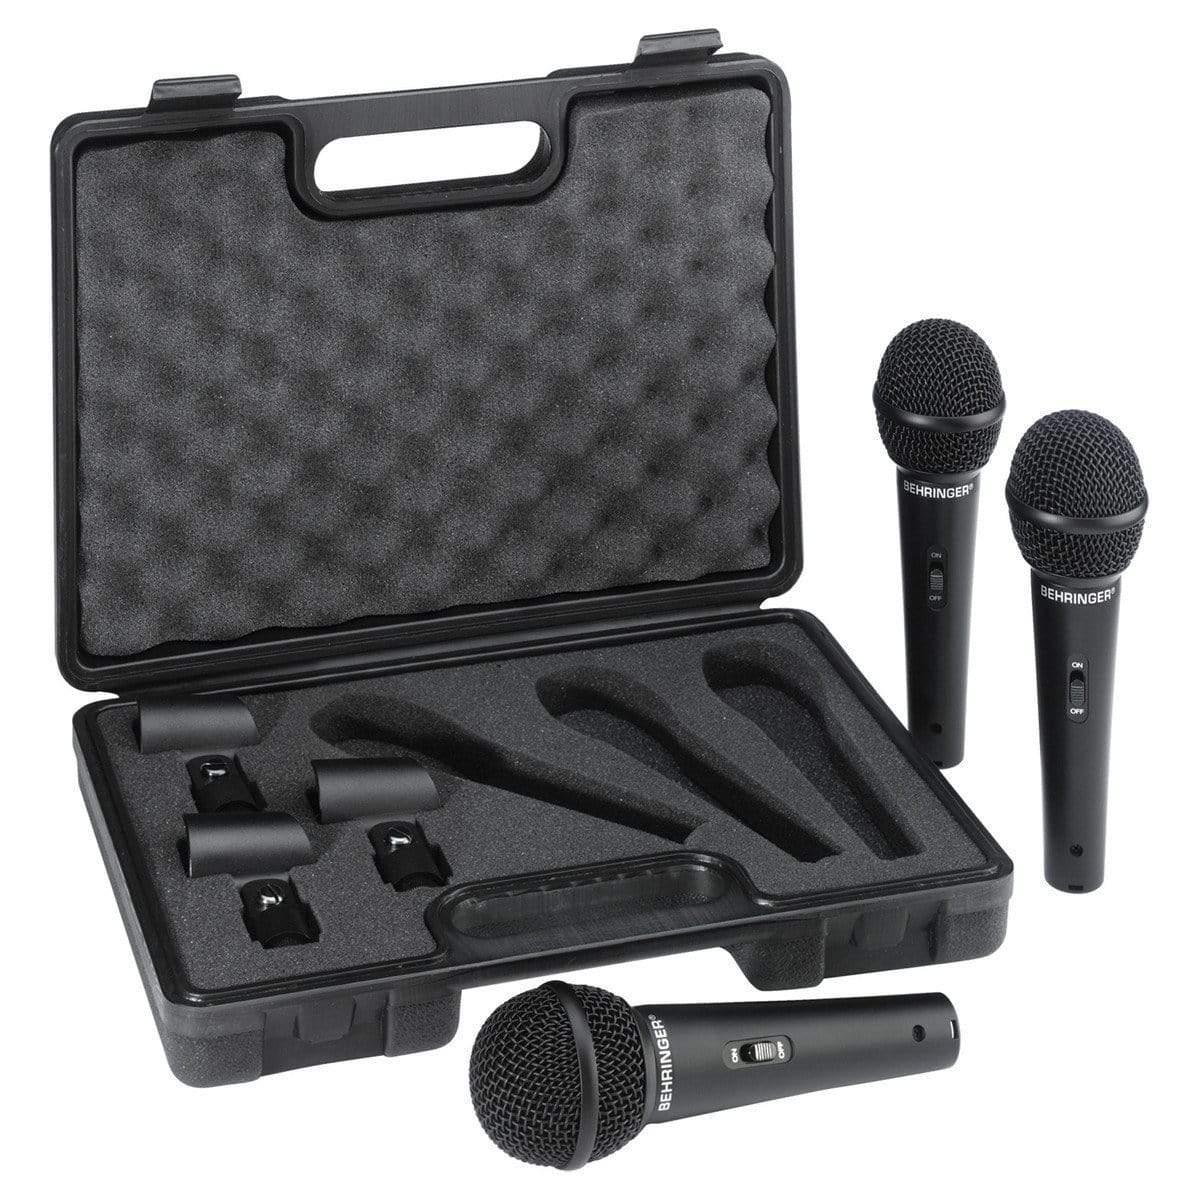 Behringer XM1800S Ultravoice Dynamic Microphone